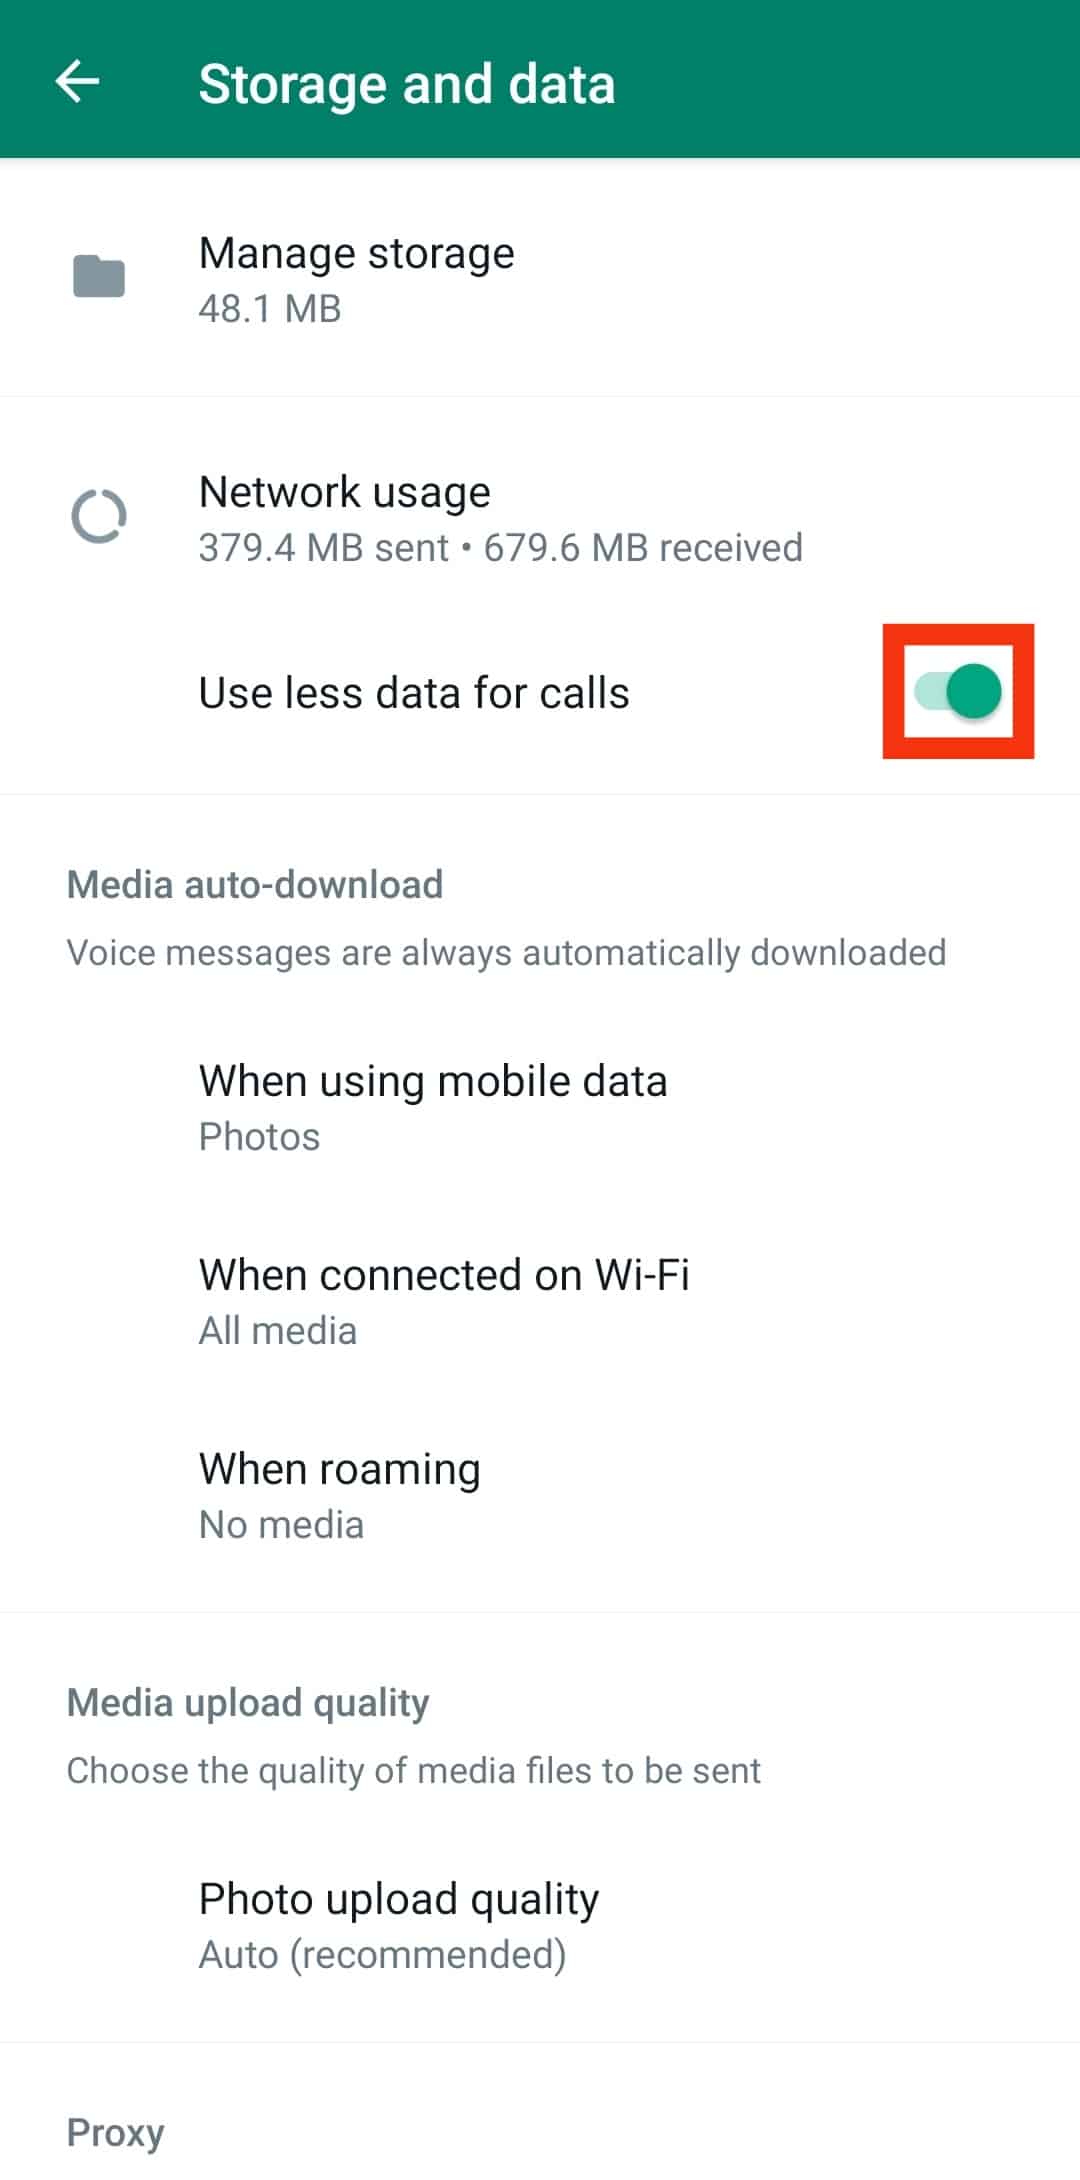 Enable The Option For Use Less Data For Calls